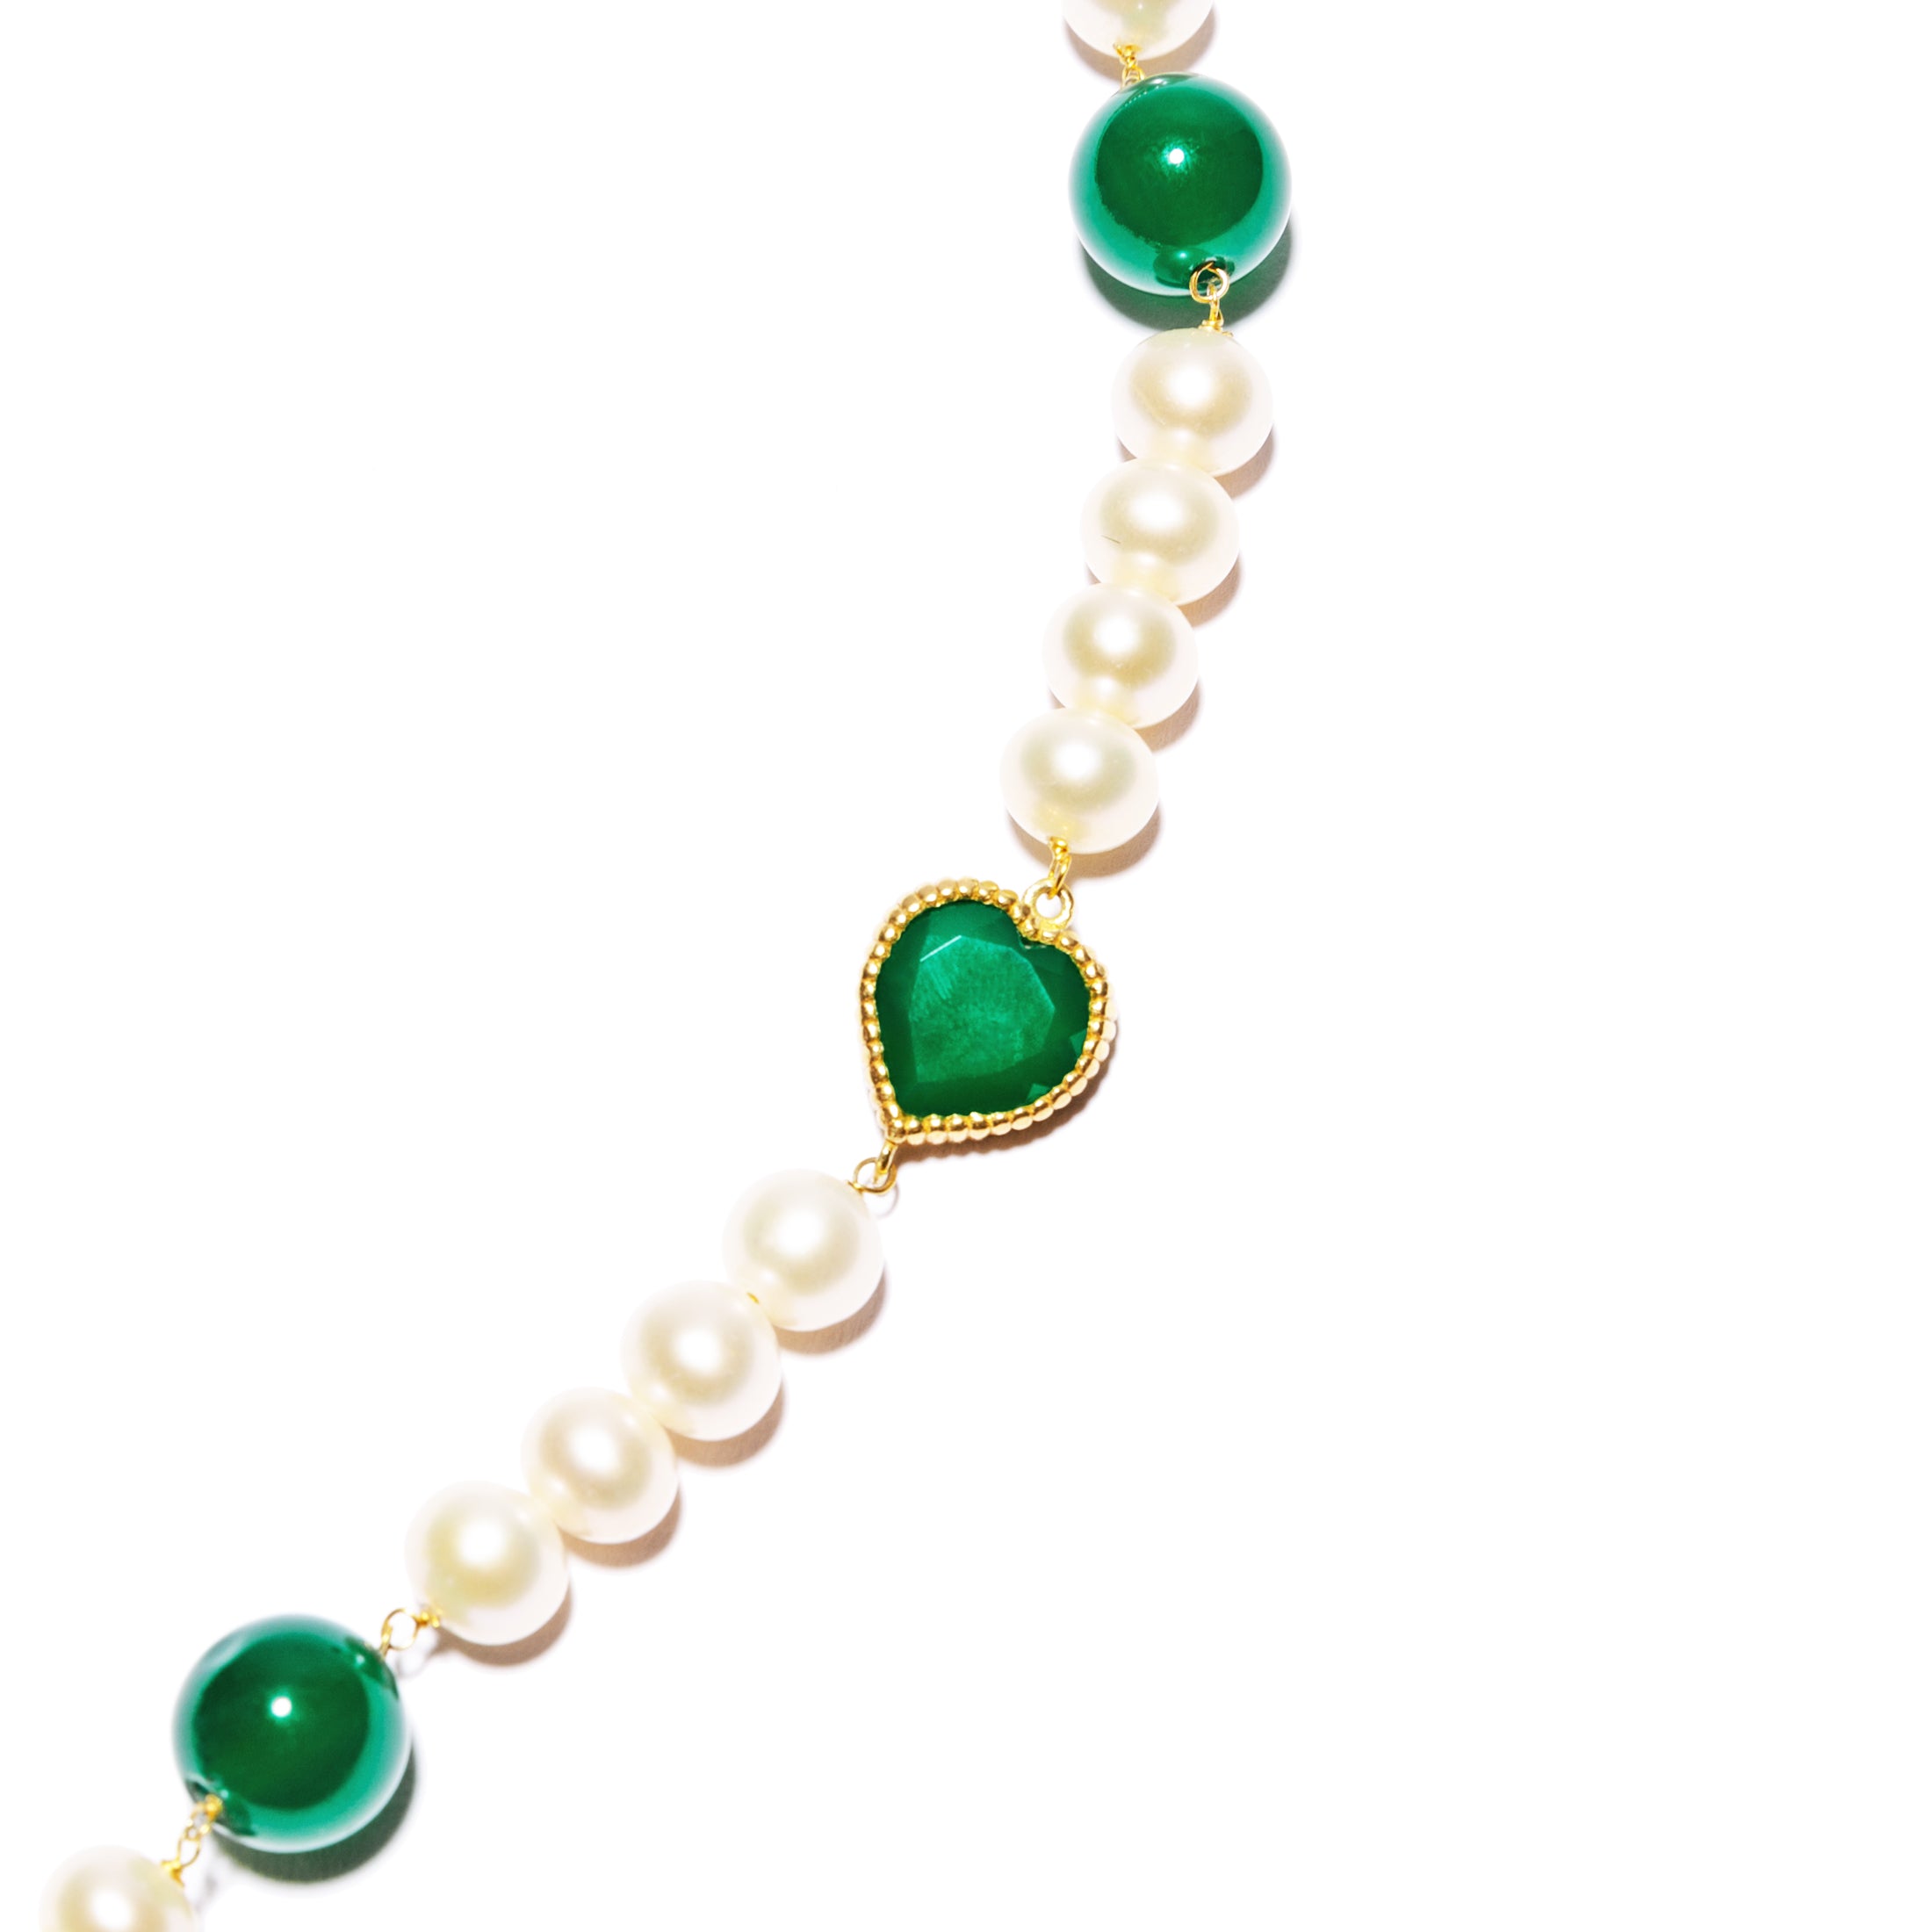 Buy SURAT DIAMOND JEWELLERY Single Line Drop Green Onyx, Stone Ring and Big  Elongated Pearl Necklace for Women (SN916) at Amazon.in